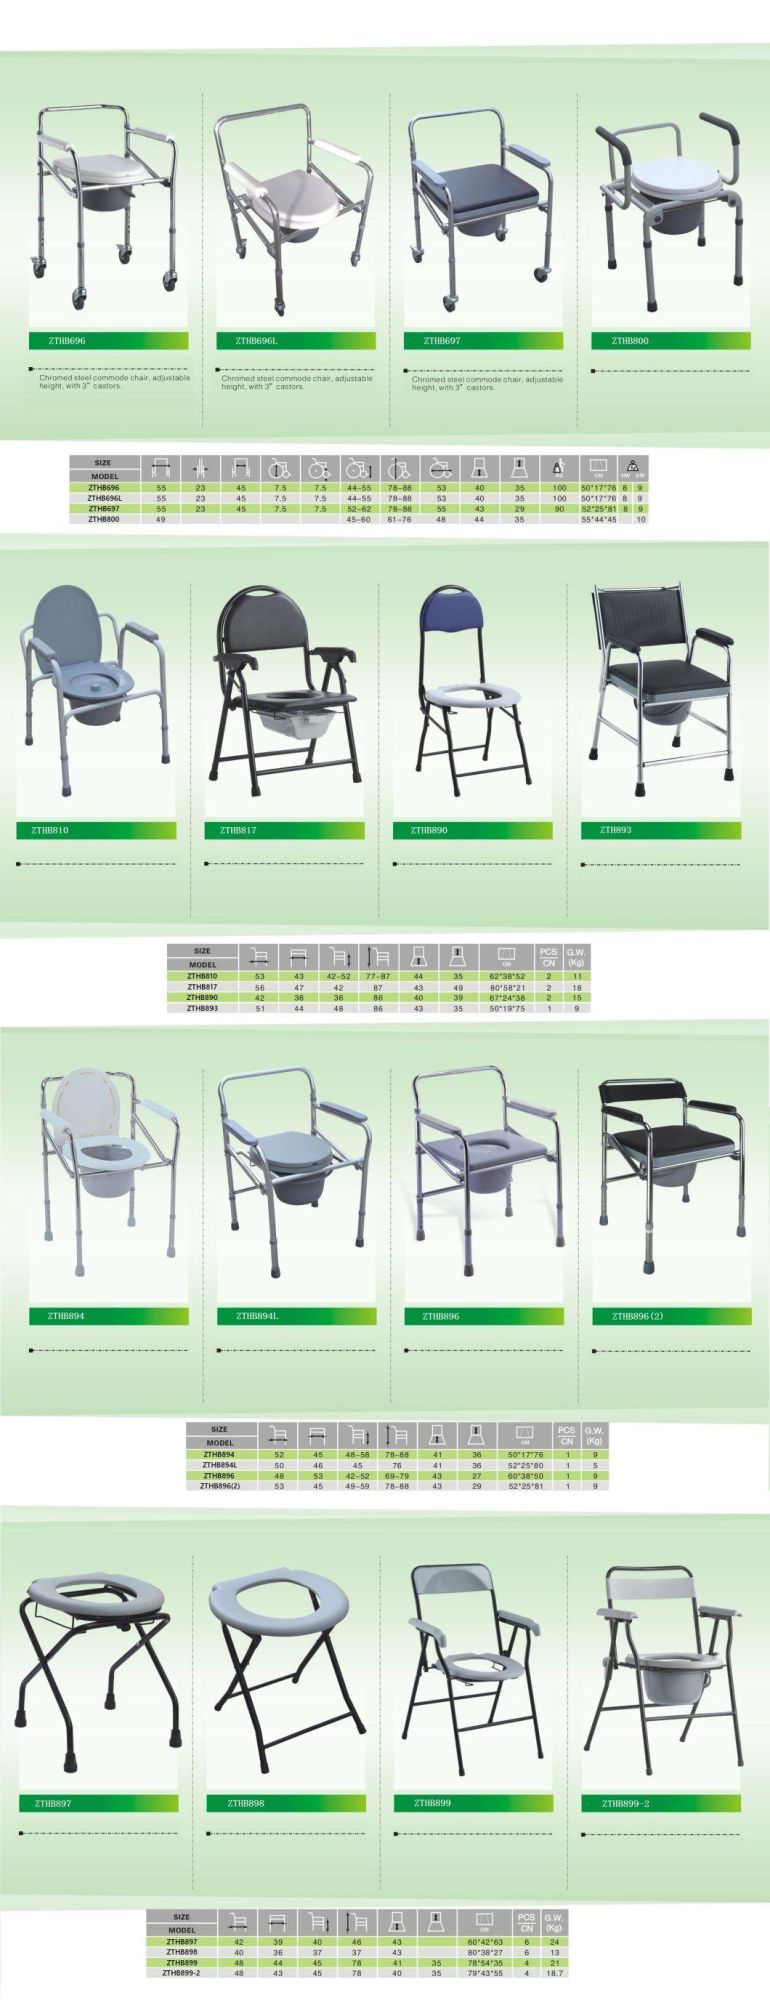 Rehabilitation Equipment Commode Chair Toilet Product Basic Foldable Chair Popular in Middle East Steel Commode Chair